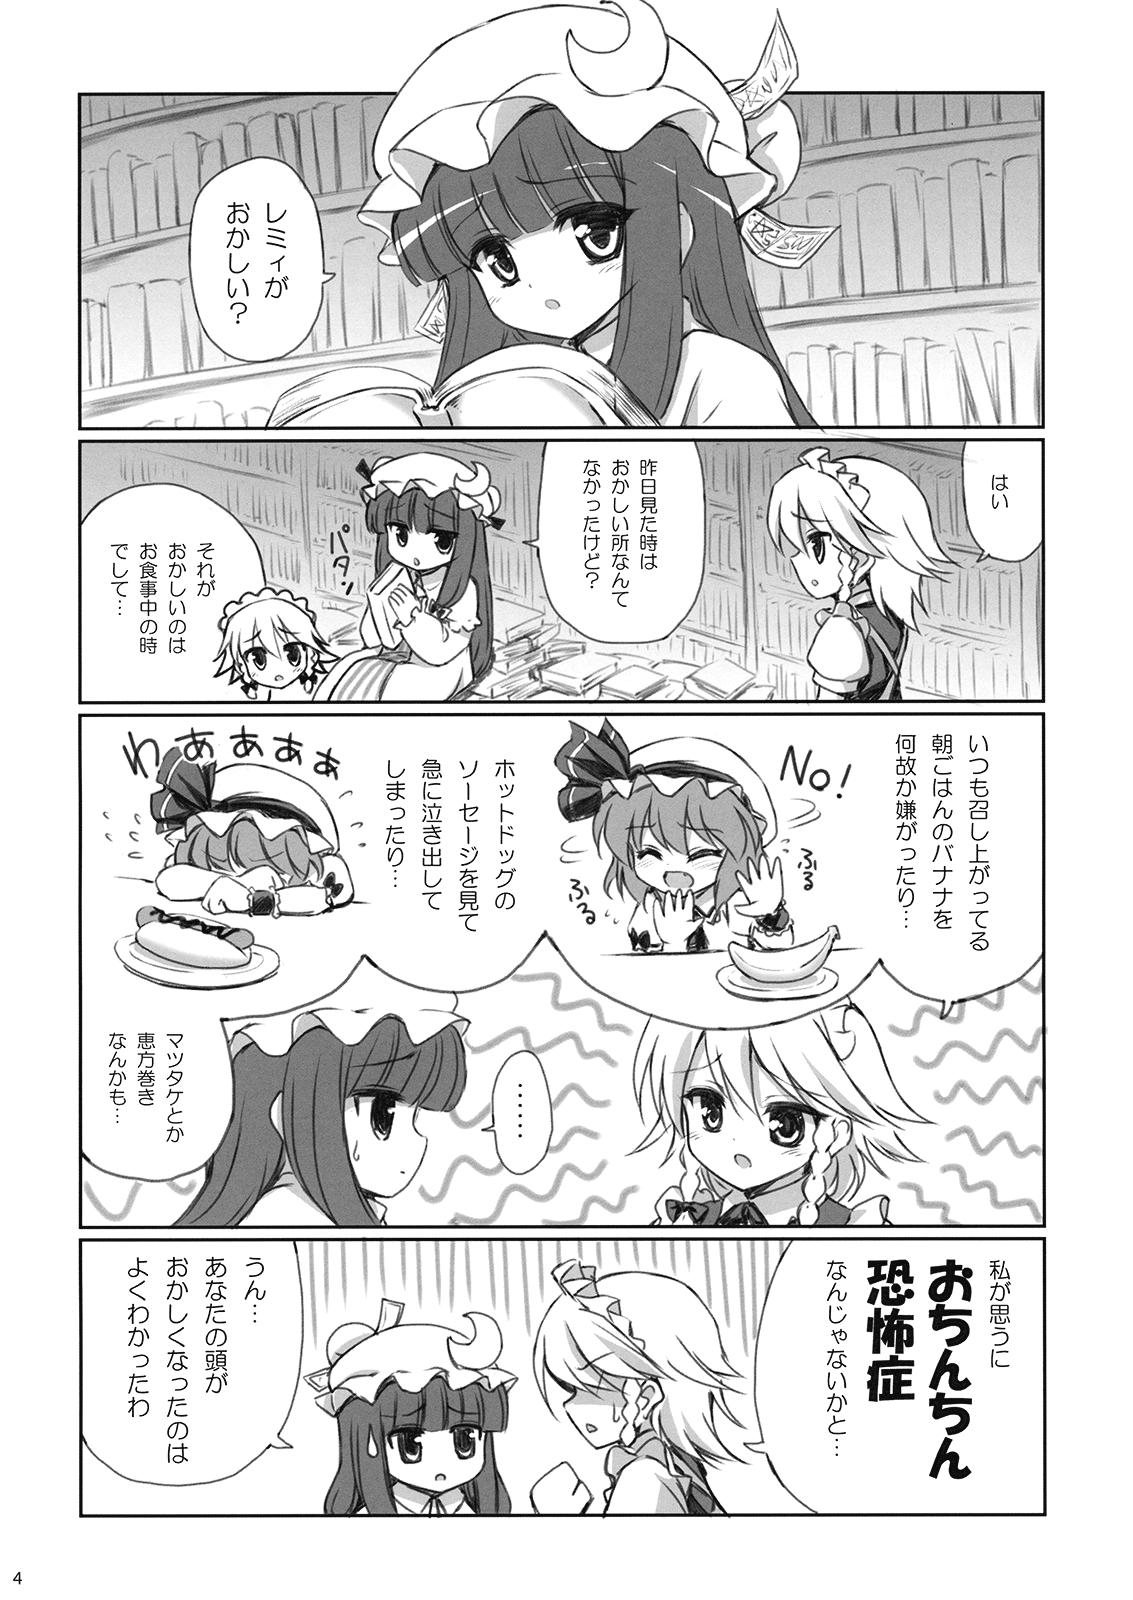 Rough Porn CHILD DRAGON - Touhou project Teens - Page 4